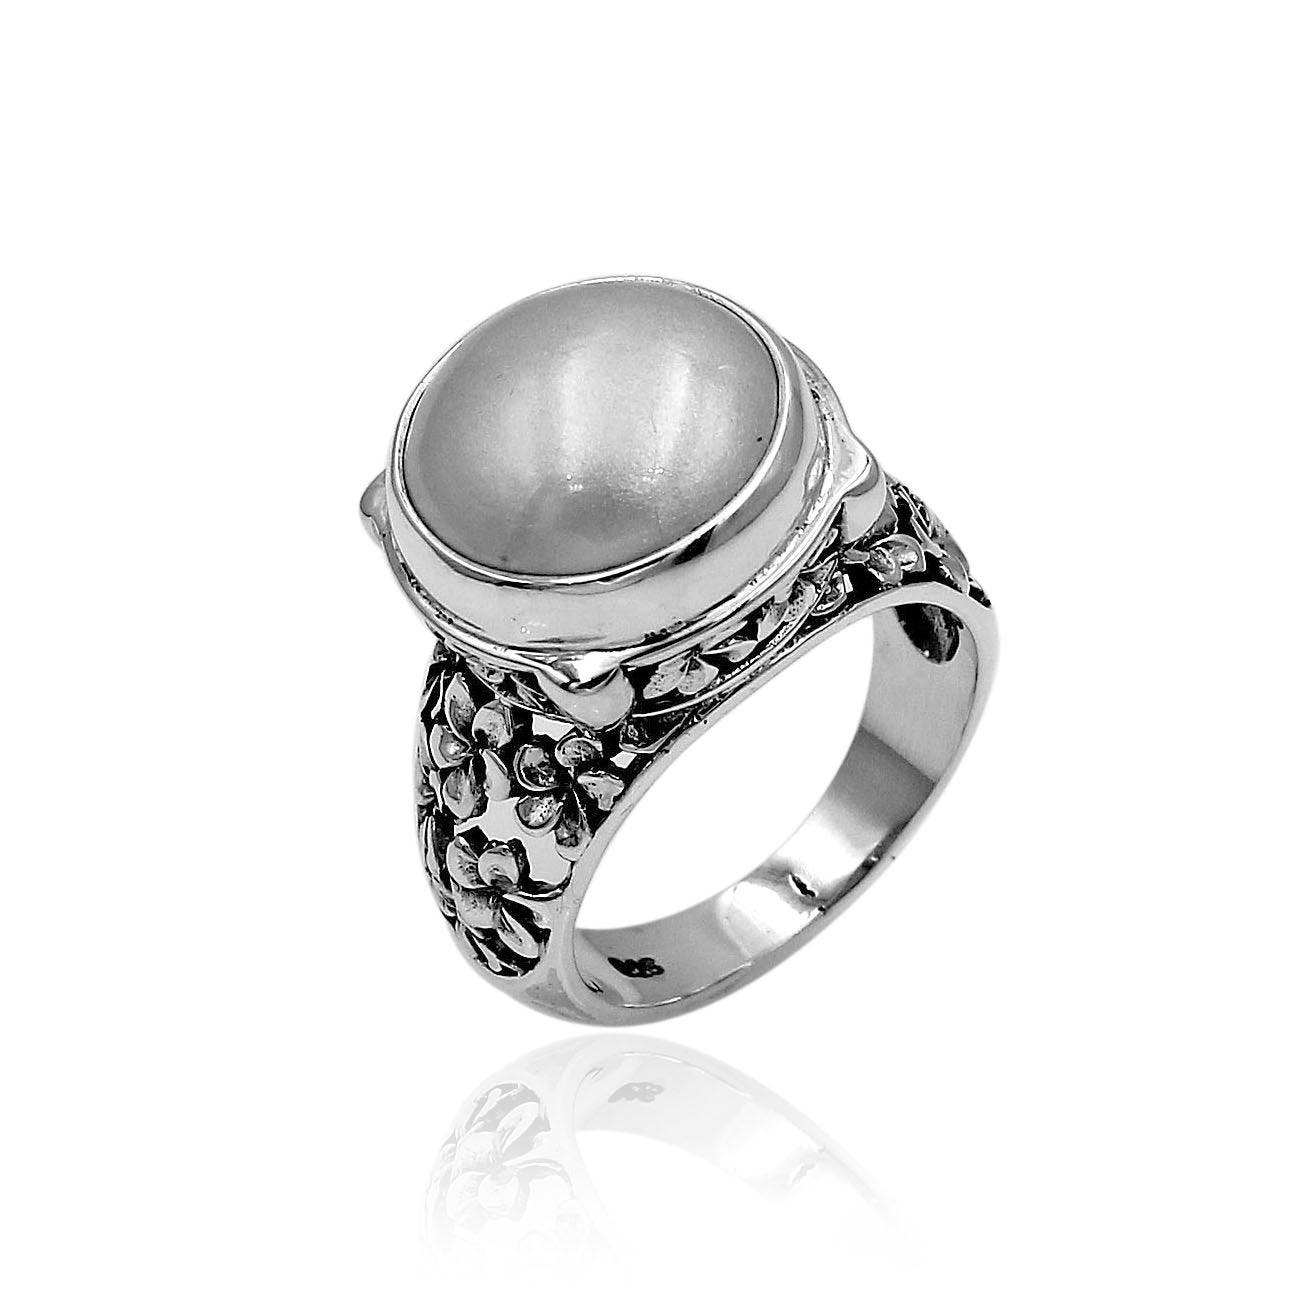 Handmade Bali Floral Fresh Water Mabe Pearl Cocktail Ring in 925 Sterling Silver - Size L , M , N , O , P , Q - Inspiring Jewellery